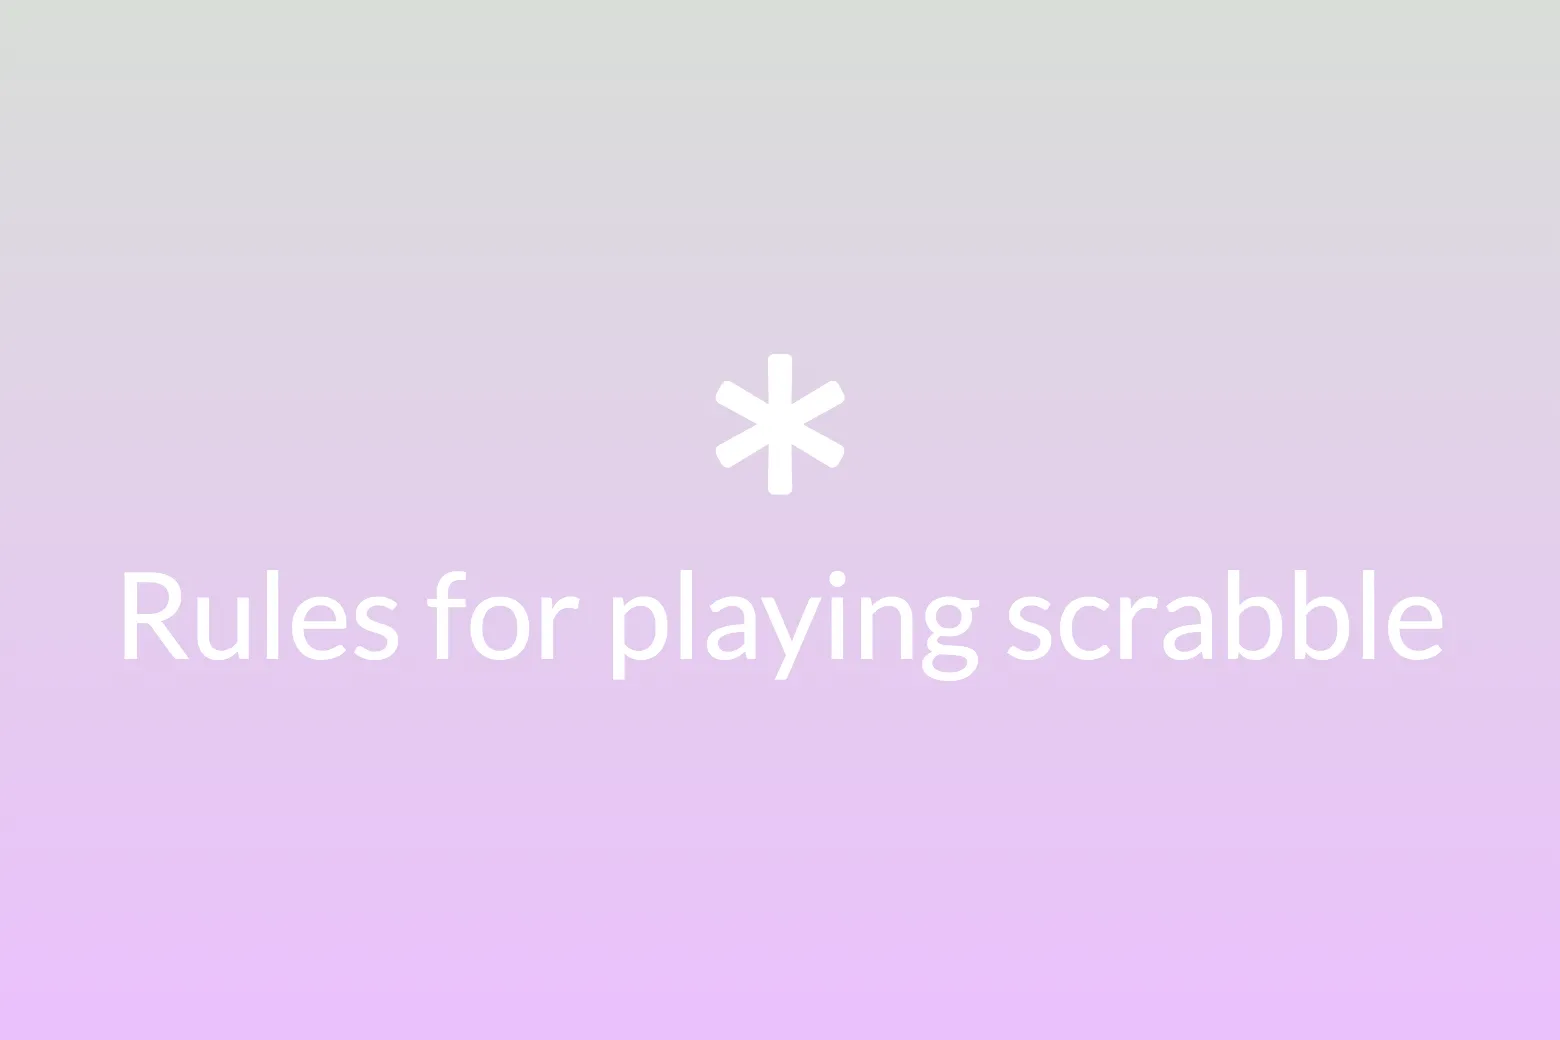 What are the rules of playing Scrabble?